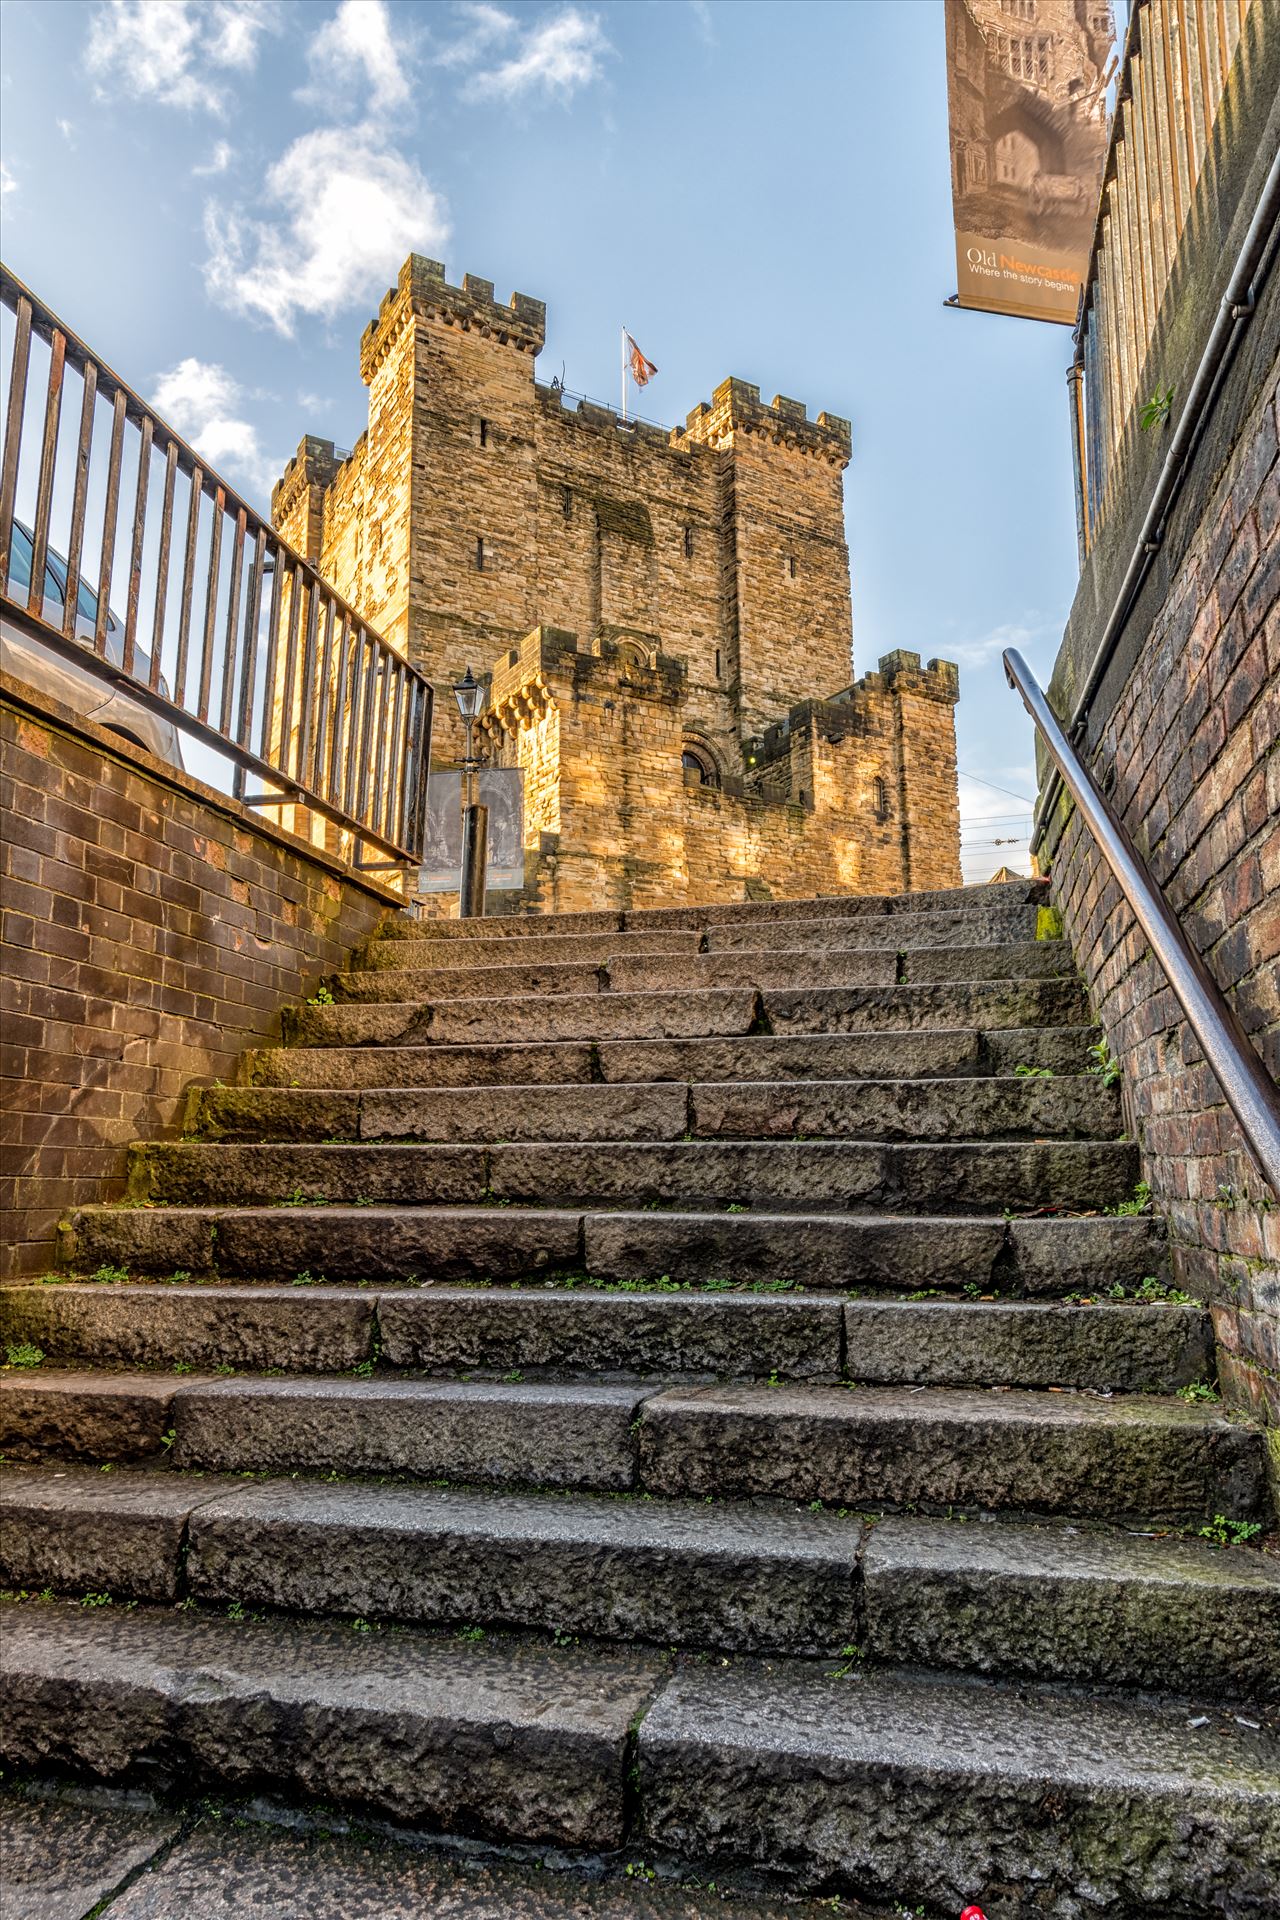 The Castle Keep - The Castle, Newcastle is a medieval fortification in Newcastle upon Tyne, built on the site of the fortress which gave the City of Newcastle its name. by philreay